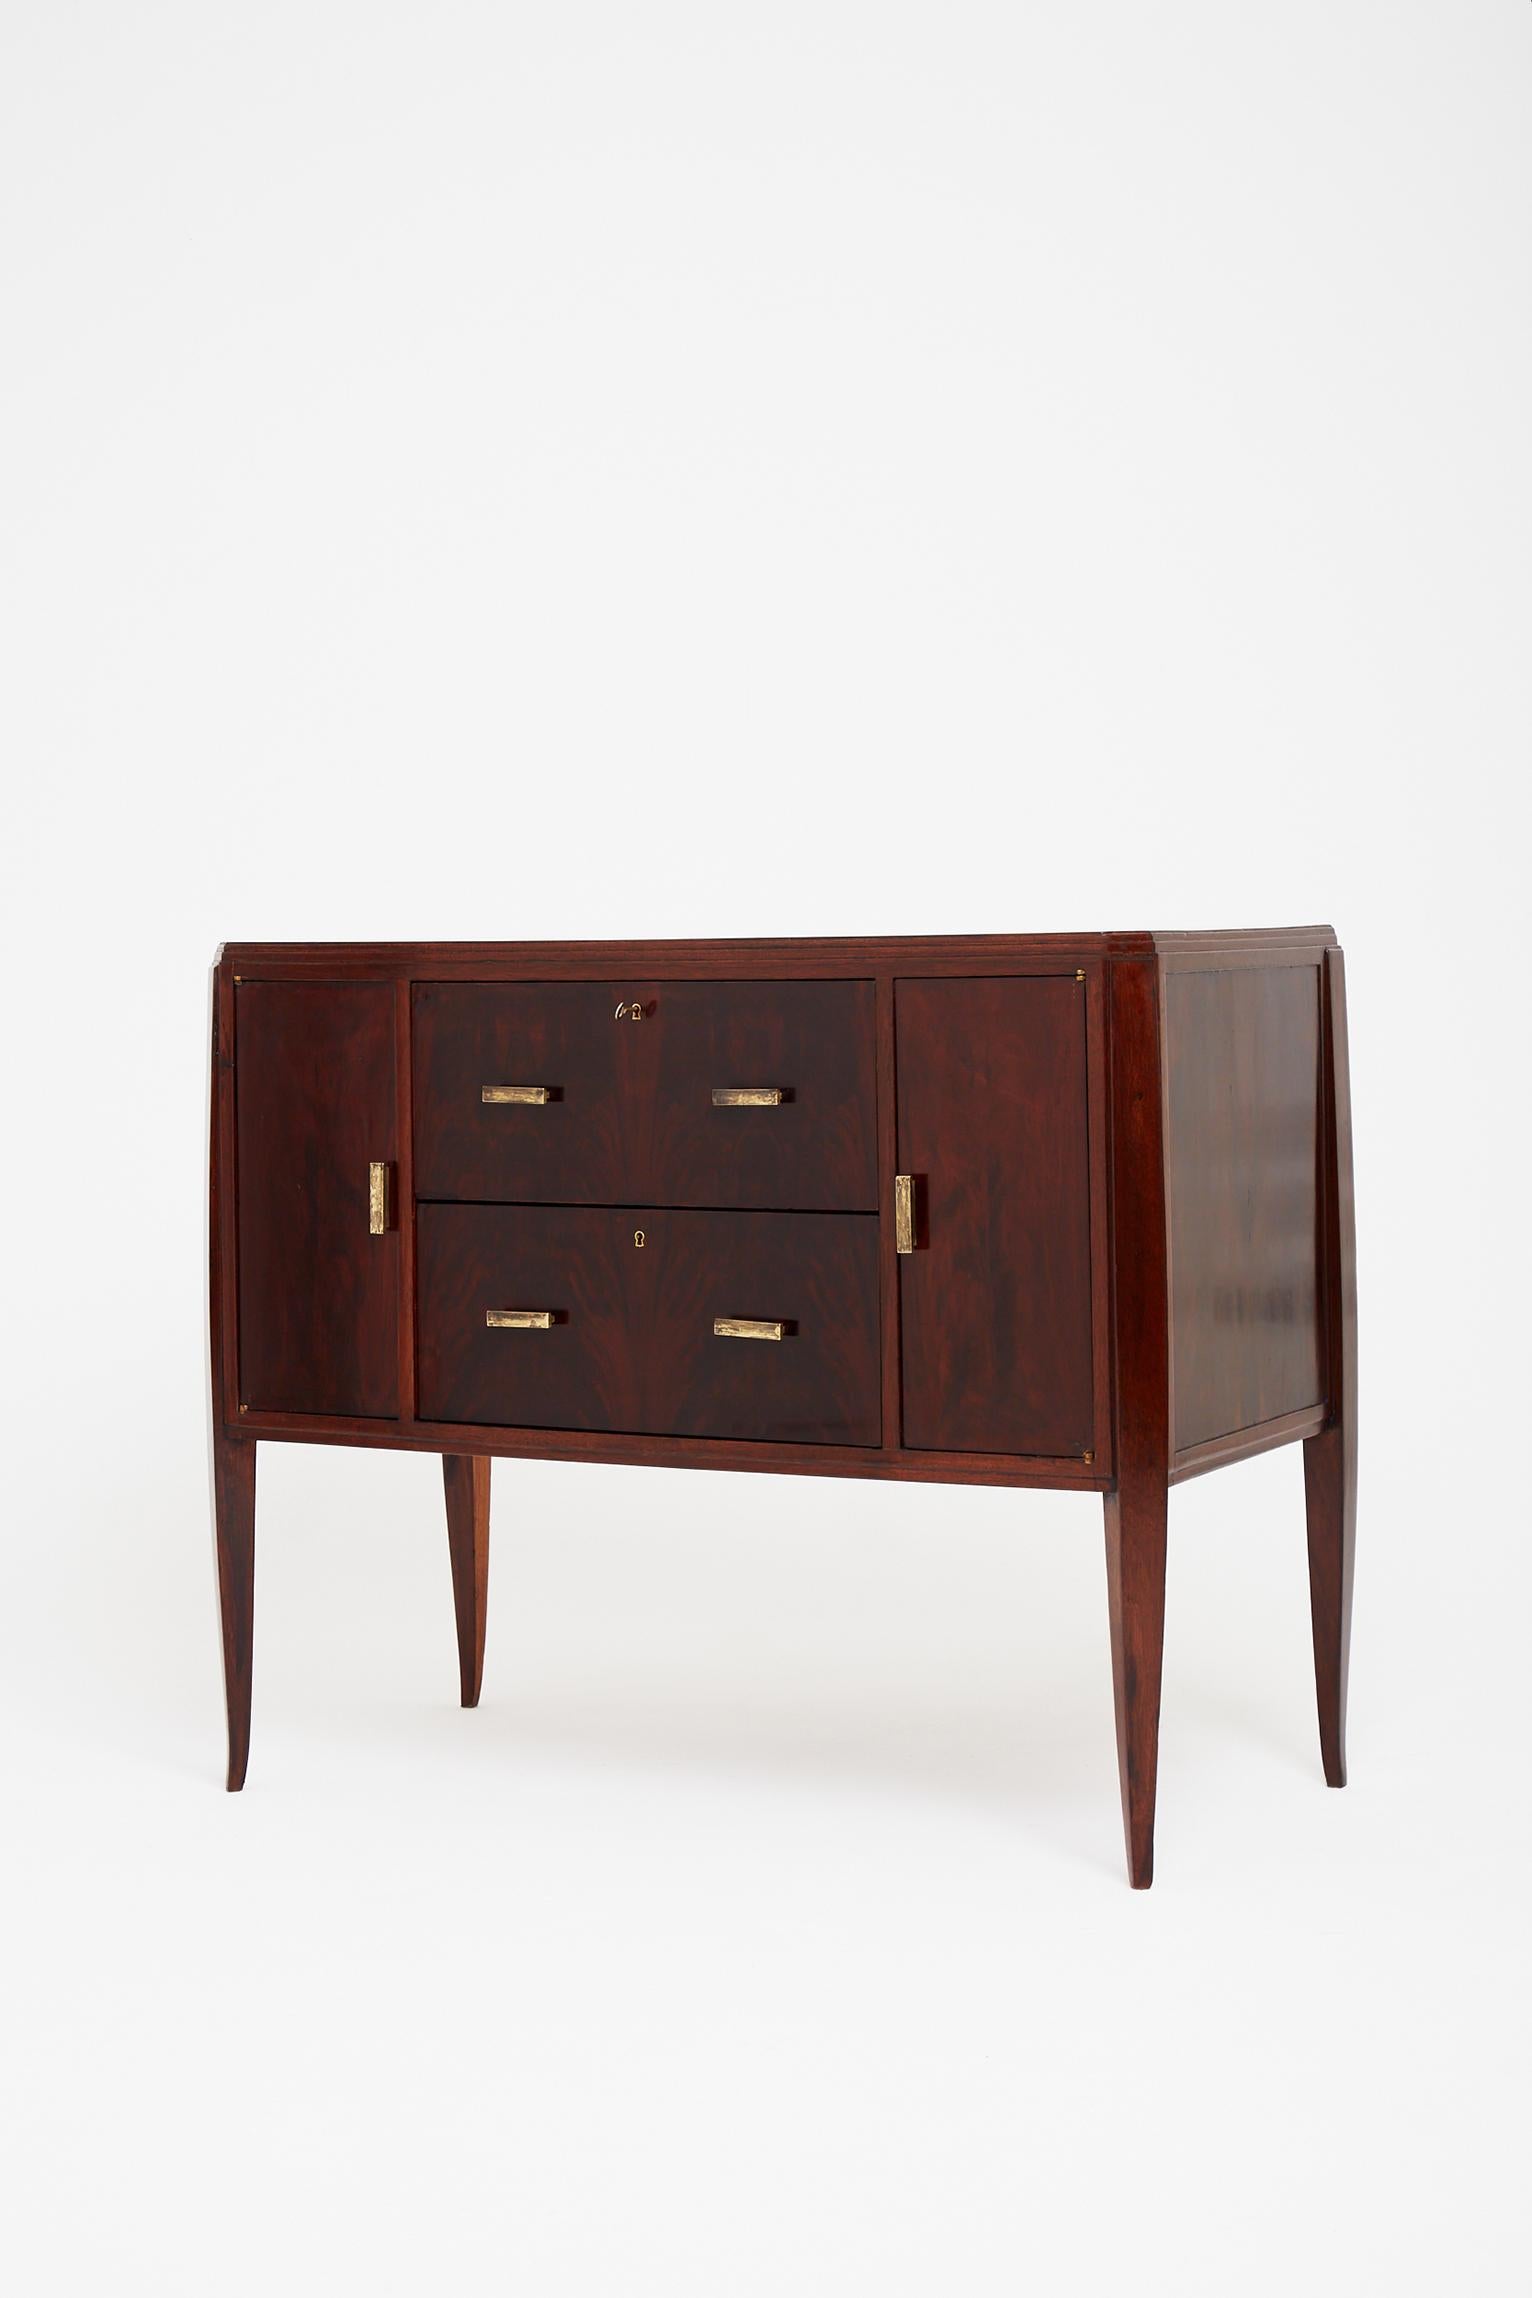 An Art Deco flamed mahogany chest of drawers, the two oak-lined drawers flanked by two cupboards, opening with brass handles, the stpped and canted corner top and body resting on elegant 'coup-de-fouet' legs.
Bearing the maker's label: G.E.J